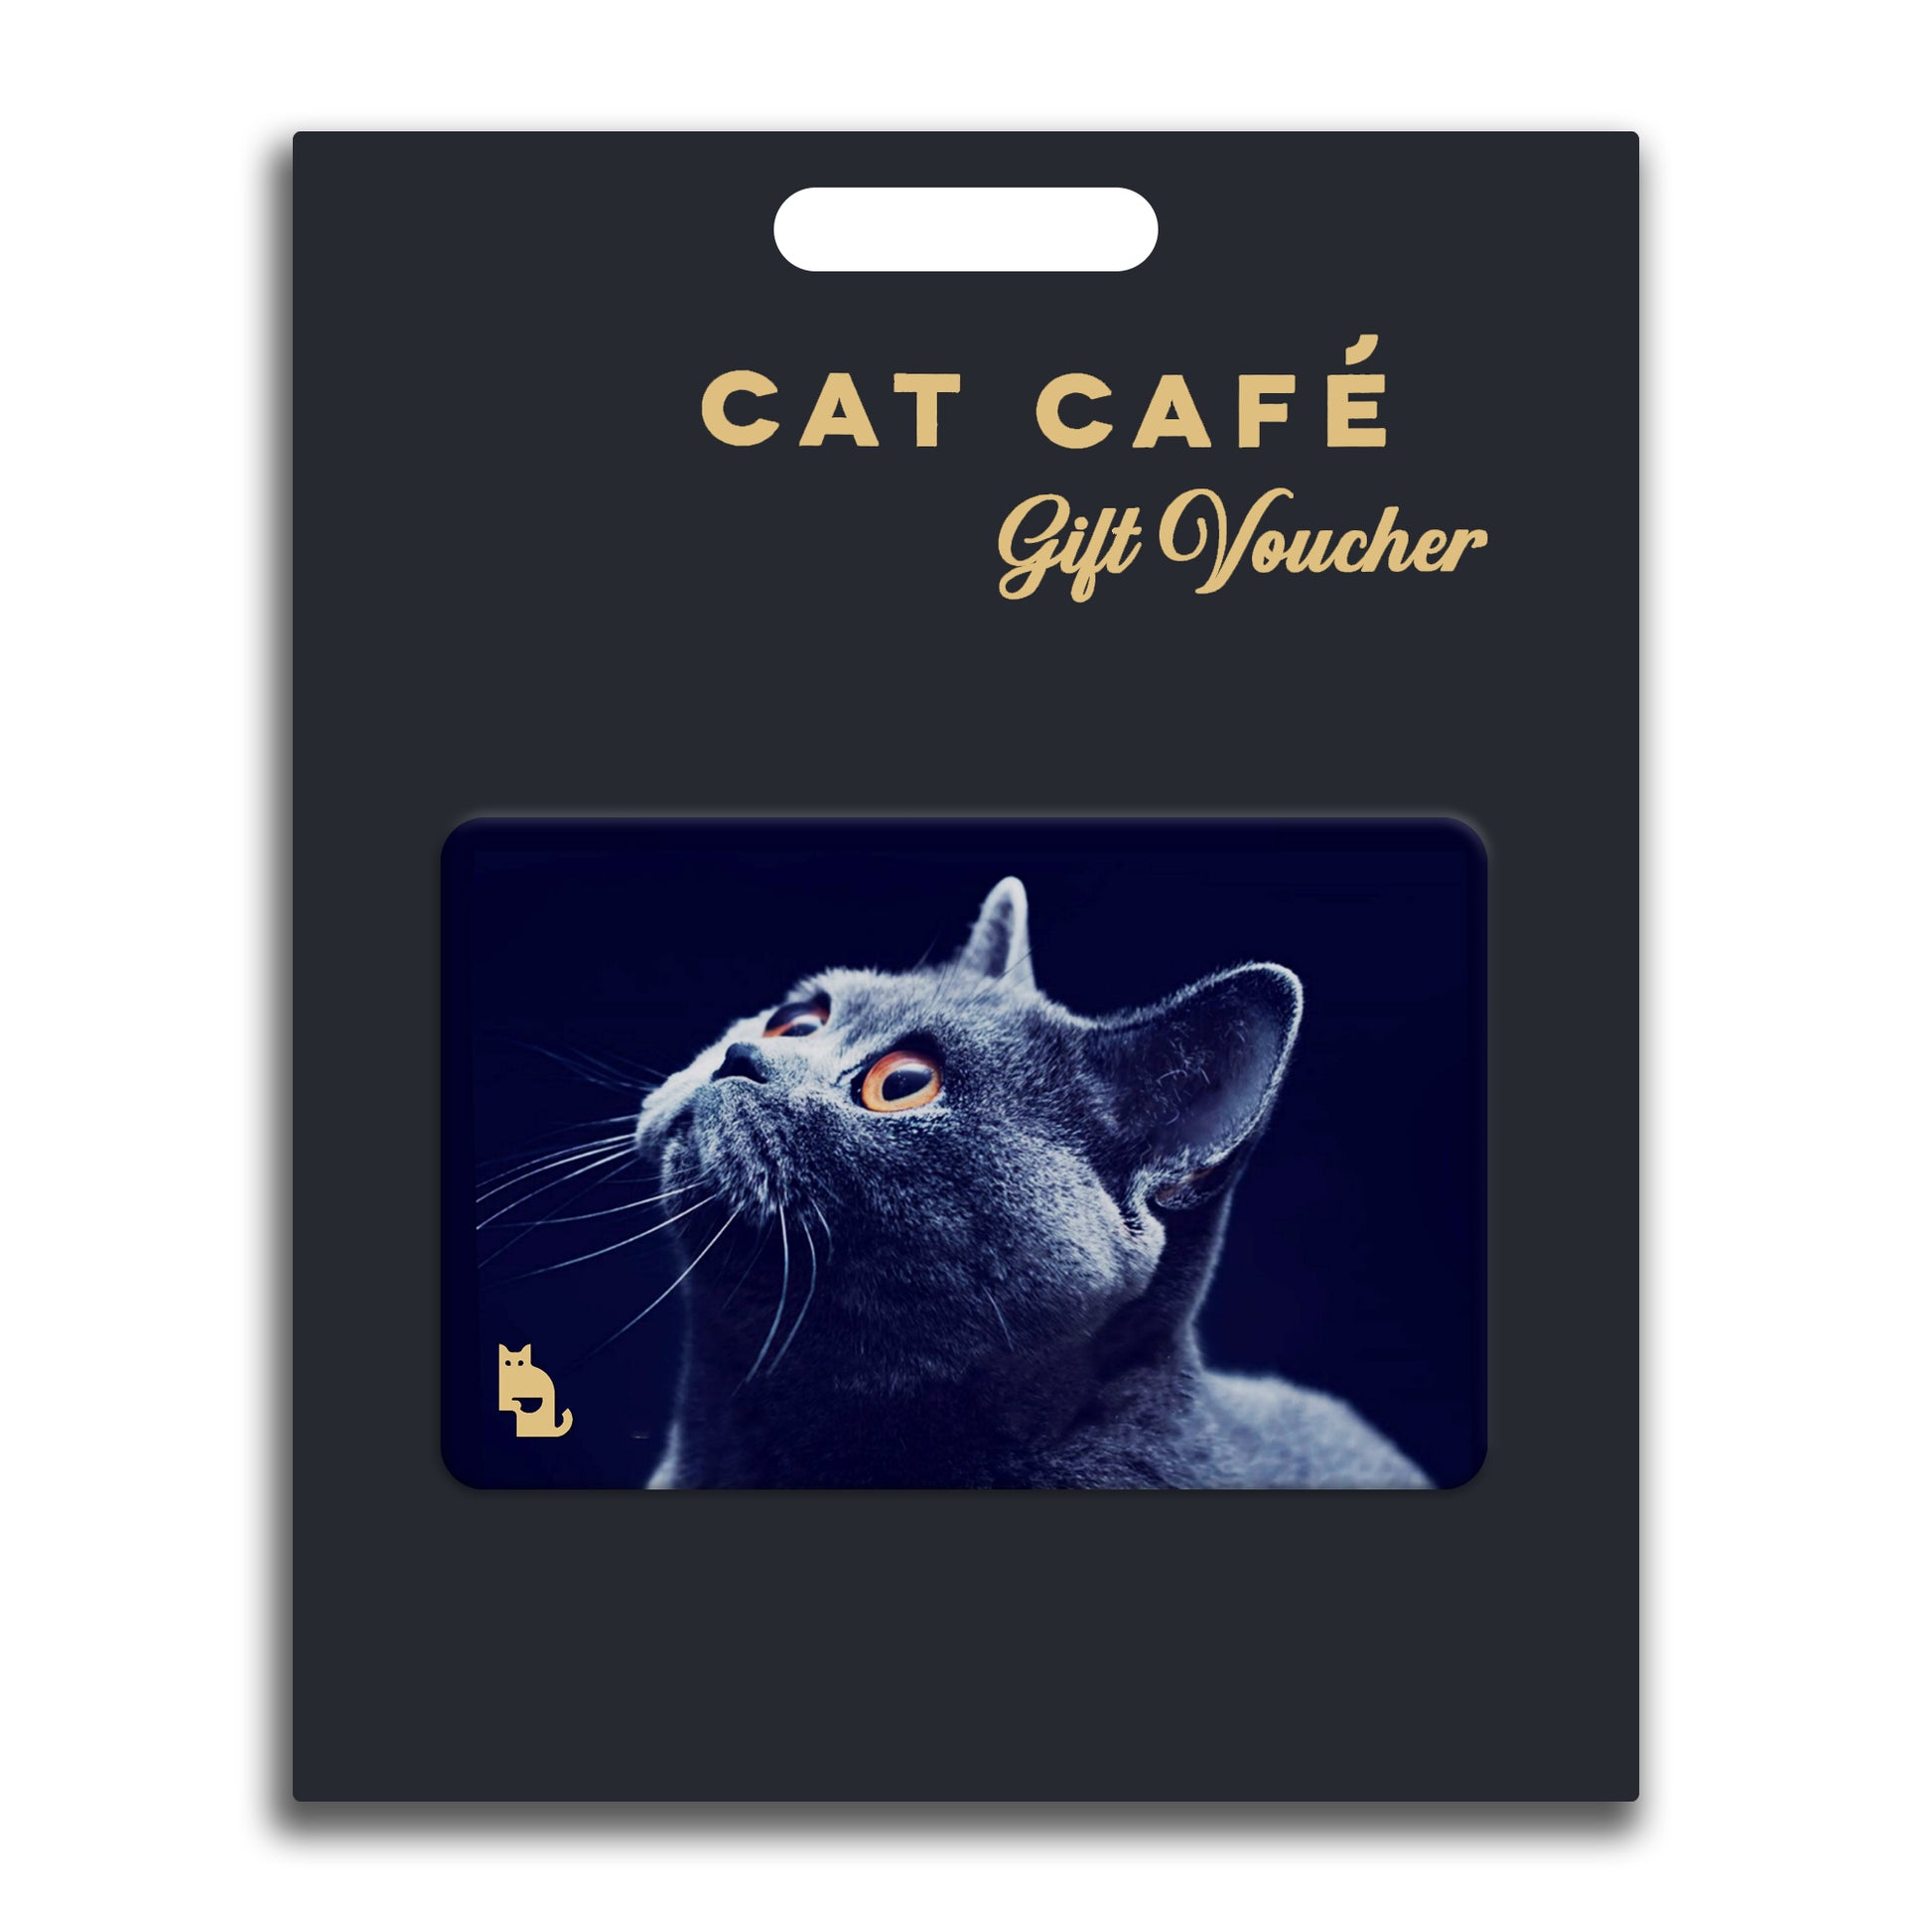 Cat Cafe Liverpool Gift Voucher - Physical Version